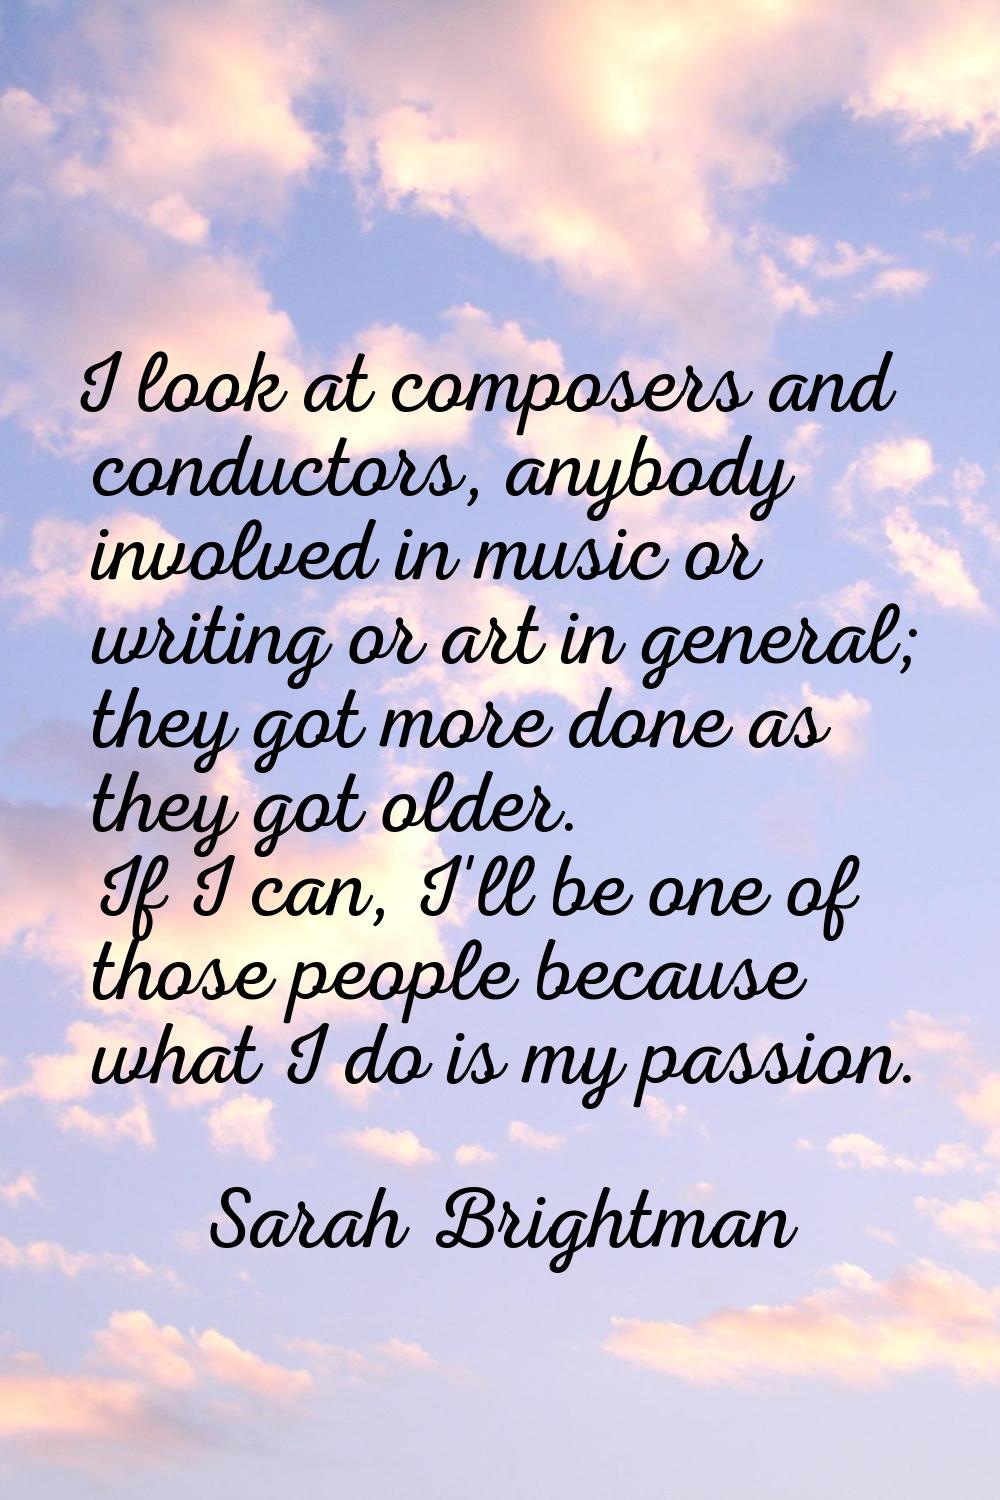 I look at composers and conductors, anybody involved in music or writing or art in general; they go